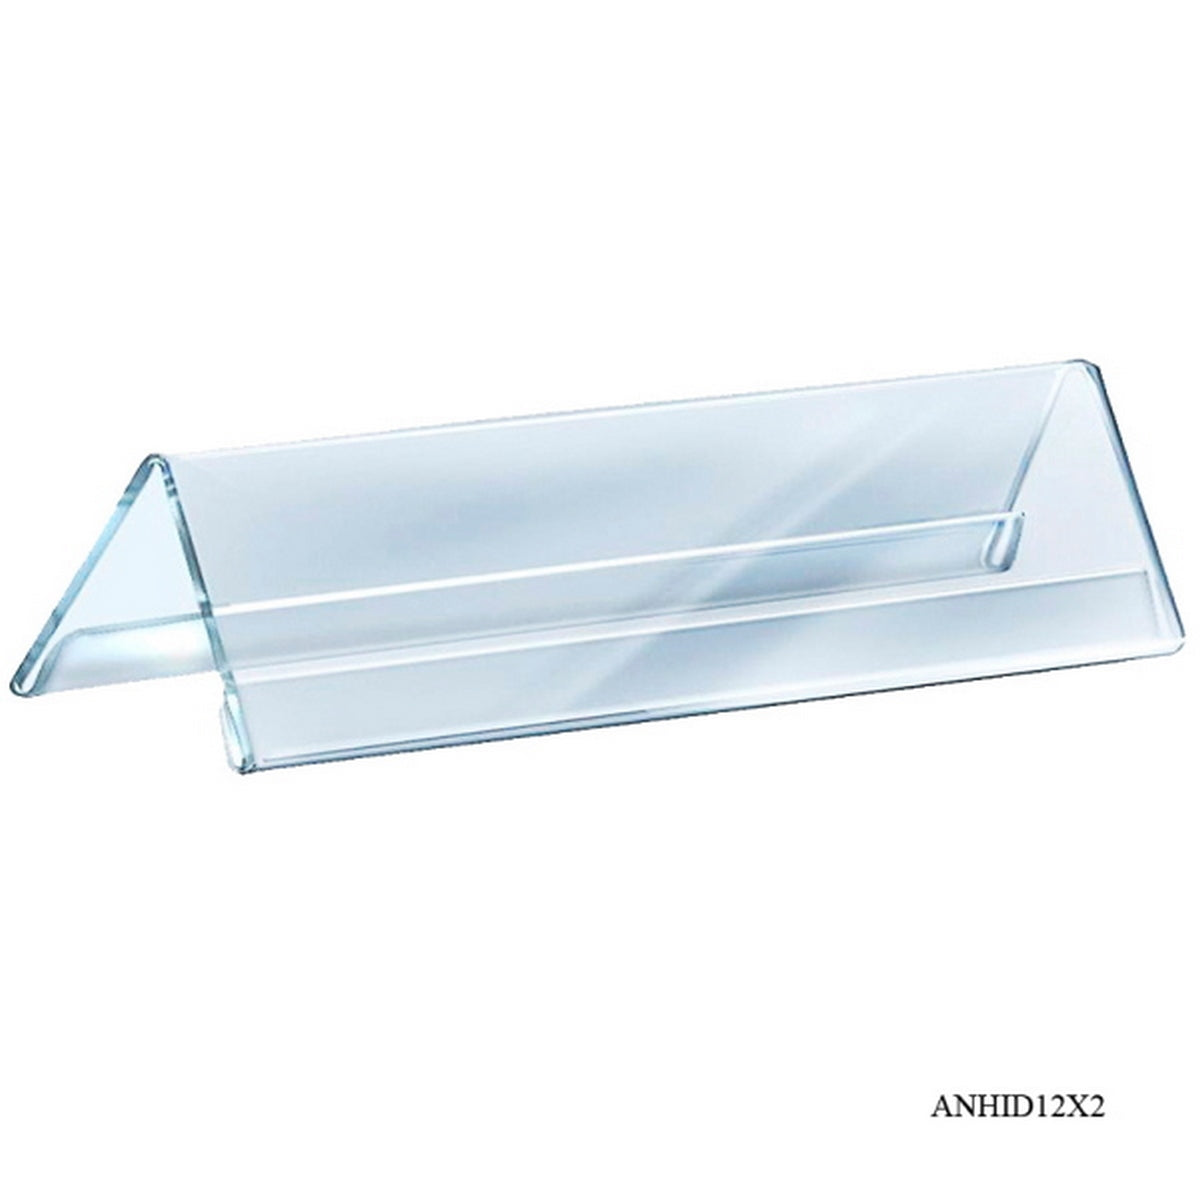 jags-mumbai Acrylic Display Stands Acrylic Name Holder 2mm ID 12 INCH V 12X2 ANHID12X2